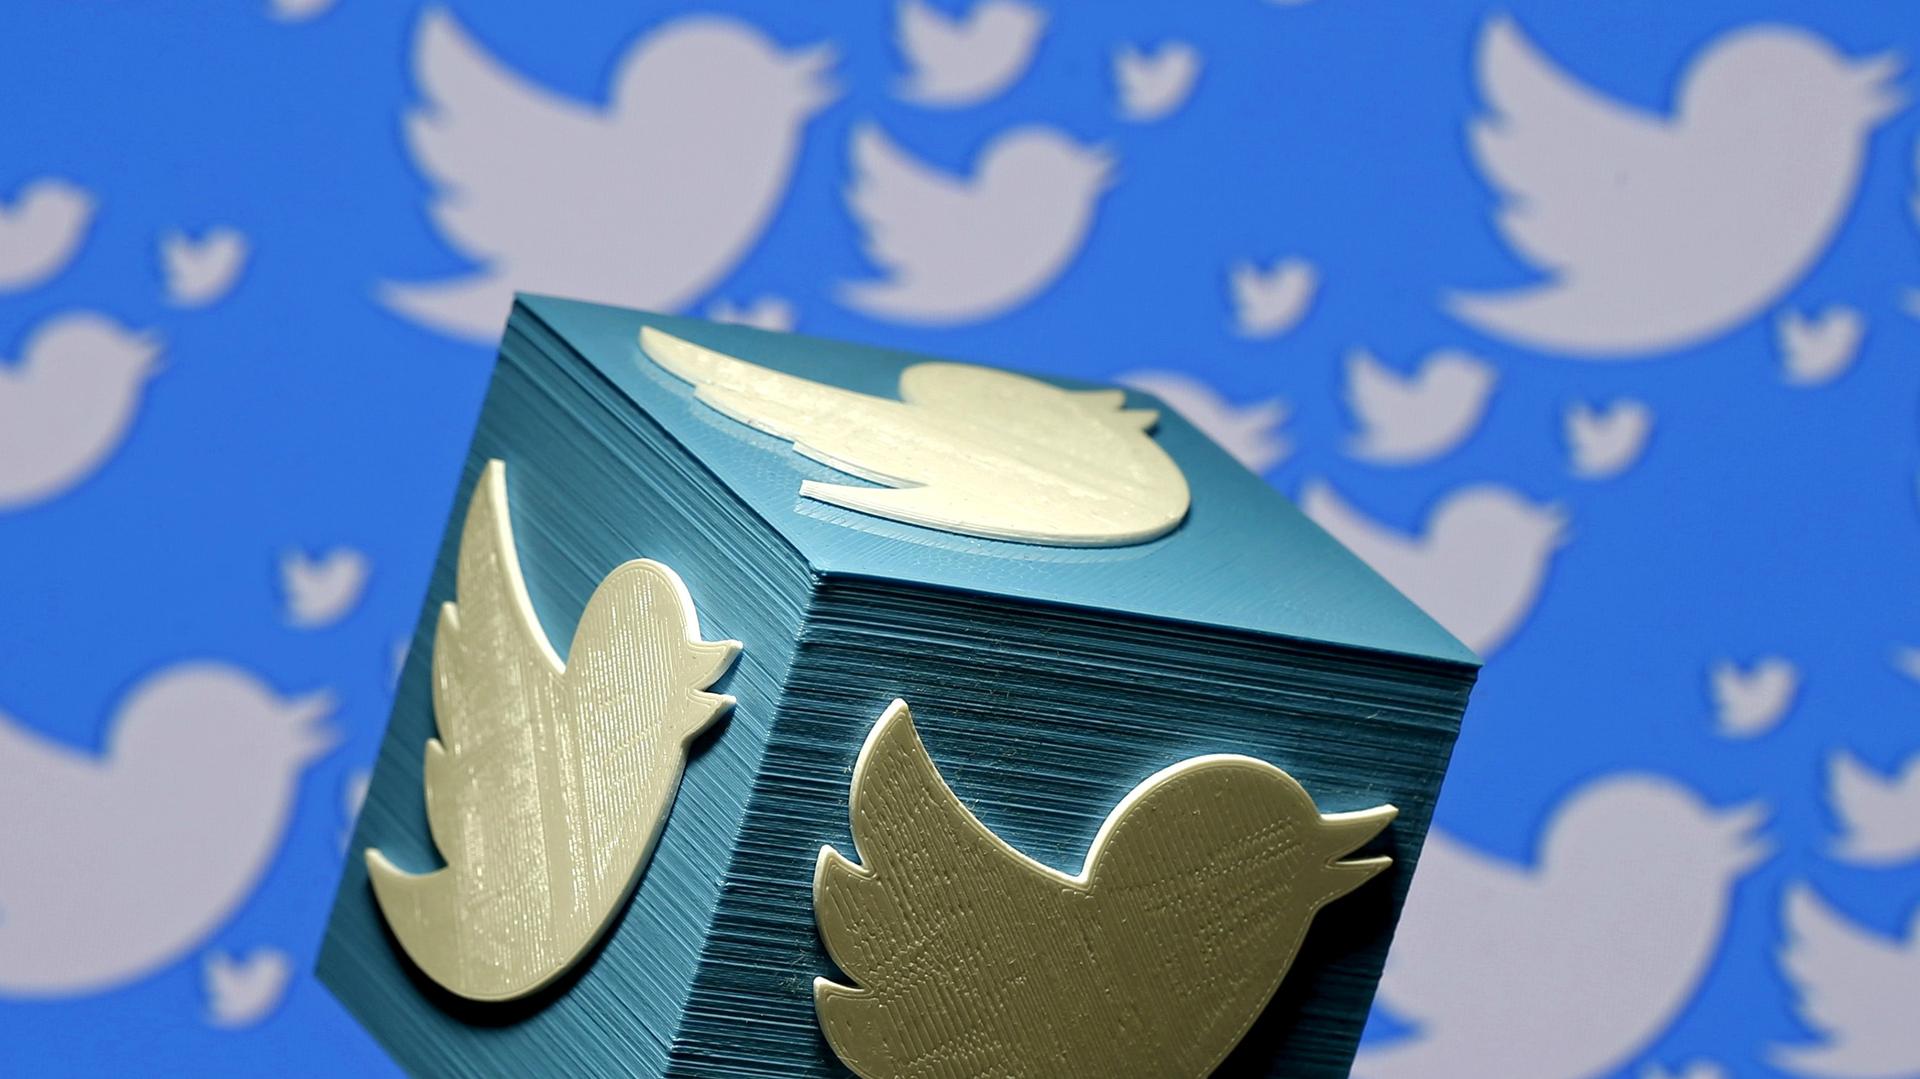 A 3D-printed logo for Twitter is seen in this picture illustration.